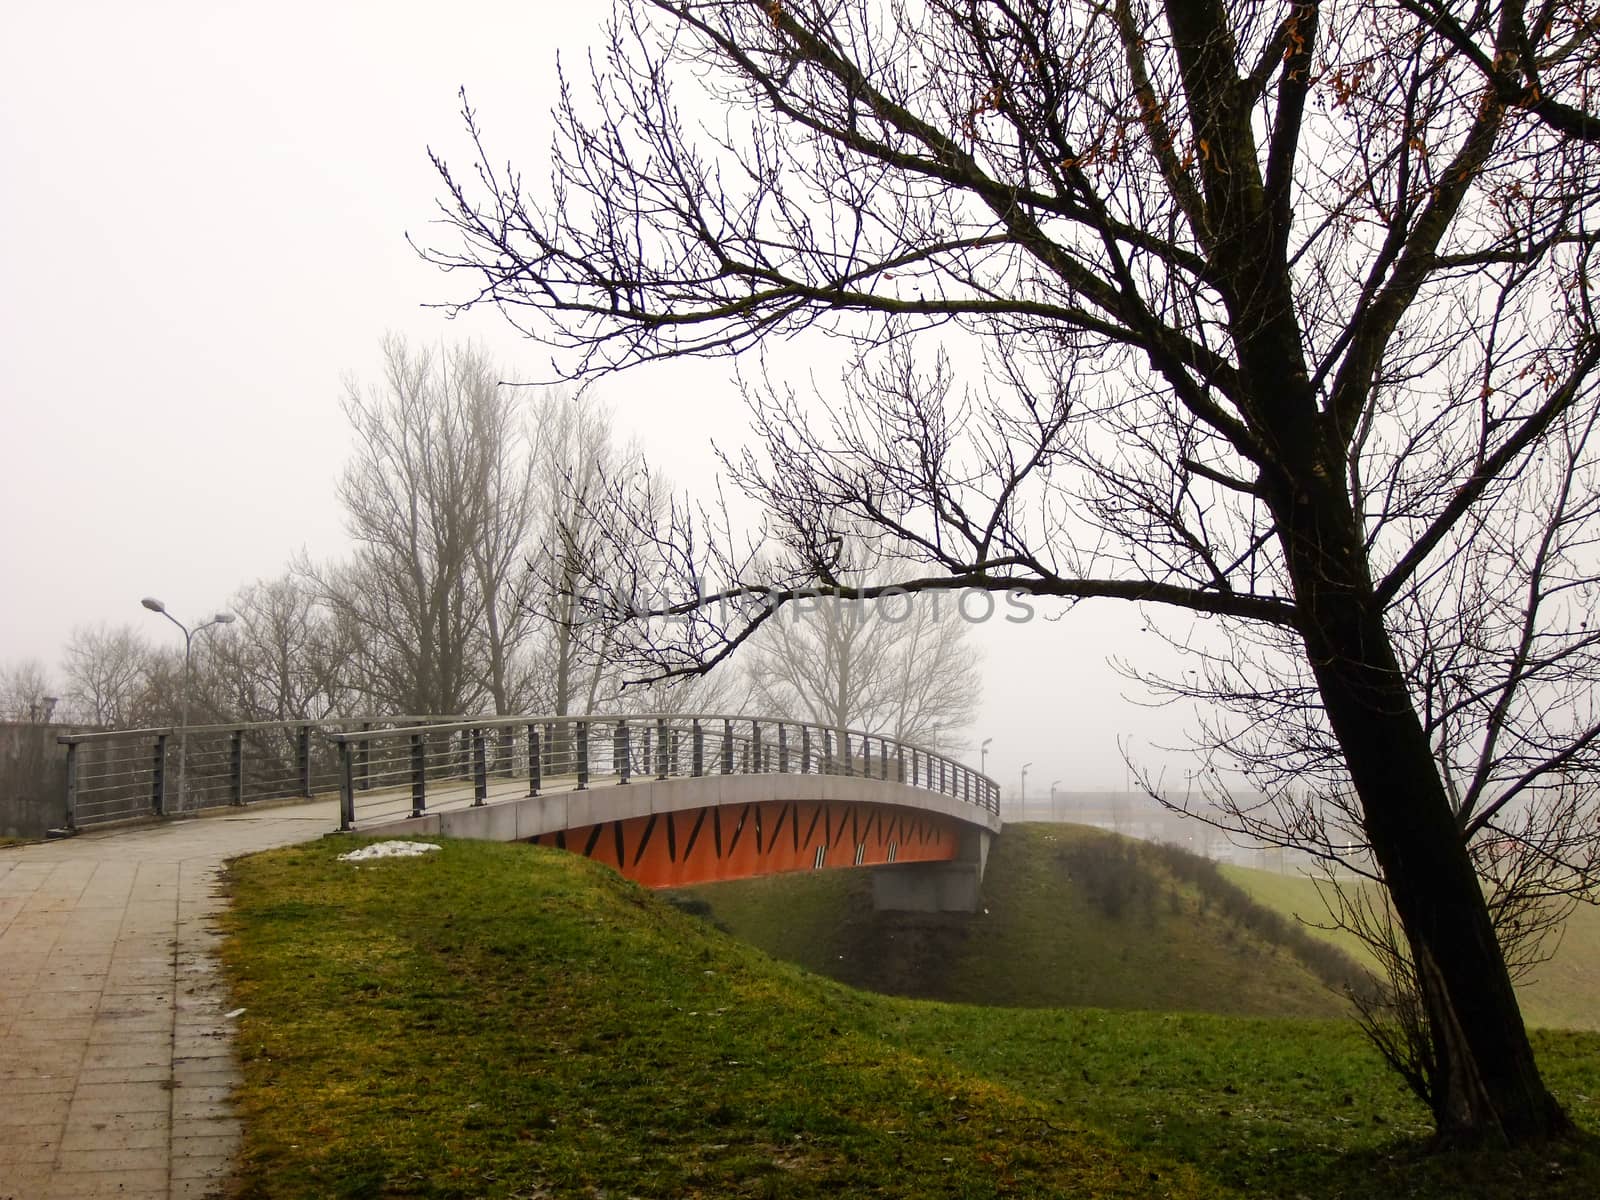 Small Bridge over a high intensive Street and a Tree near it in Vilnius City, Lithuania